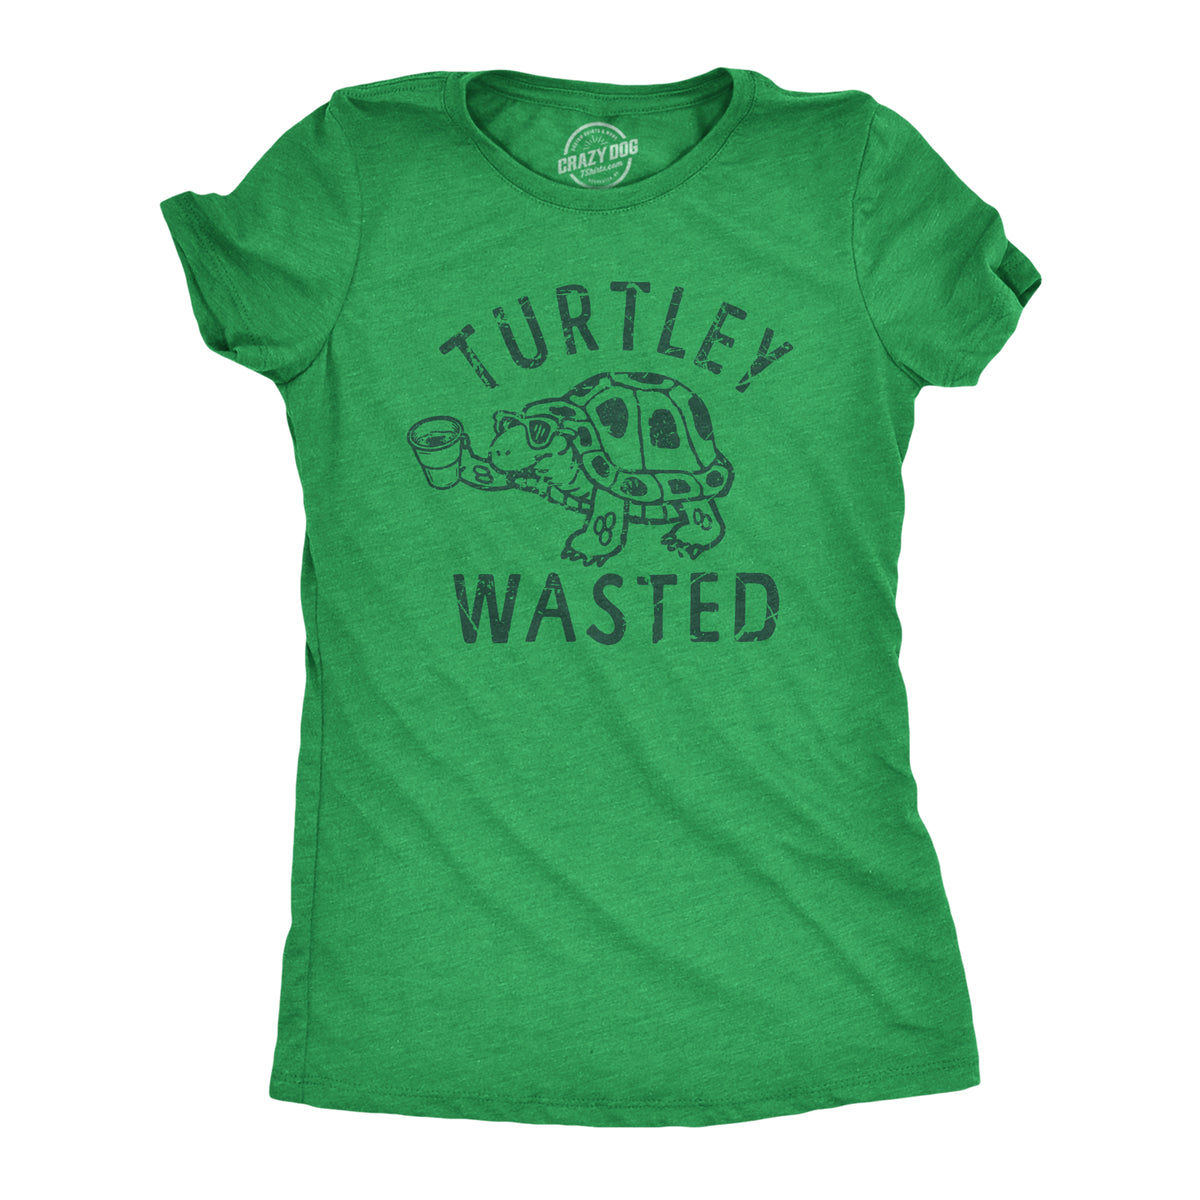 Funny Heather Green - TURTLEY Turtley Wasted Womens T Shirt Nerdy Drinking Animal Tee